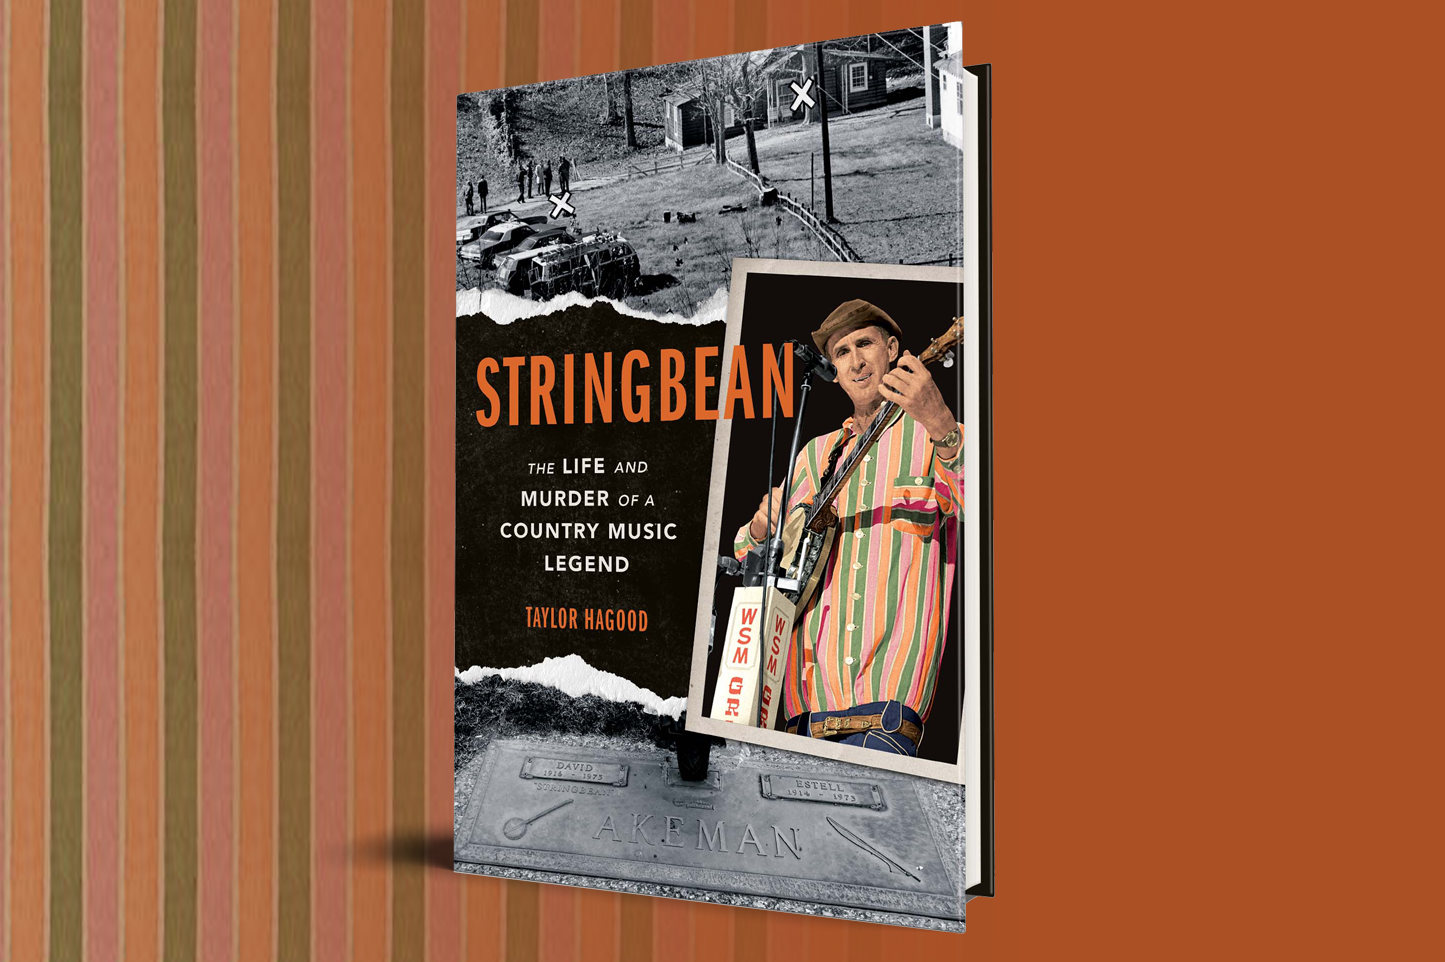 Stringbean: The Life and Murder of a Country Music Legend